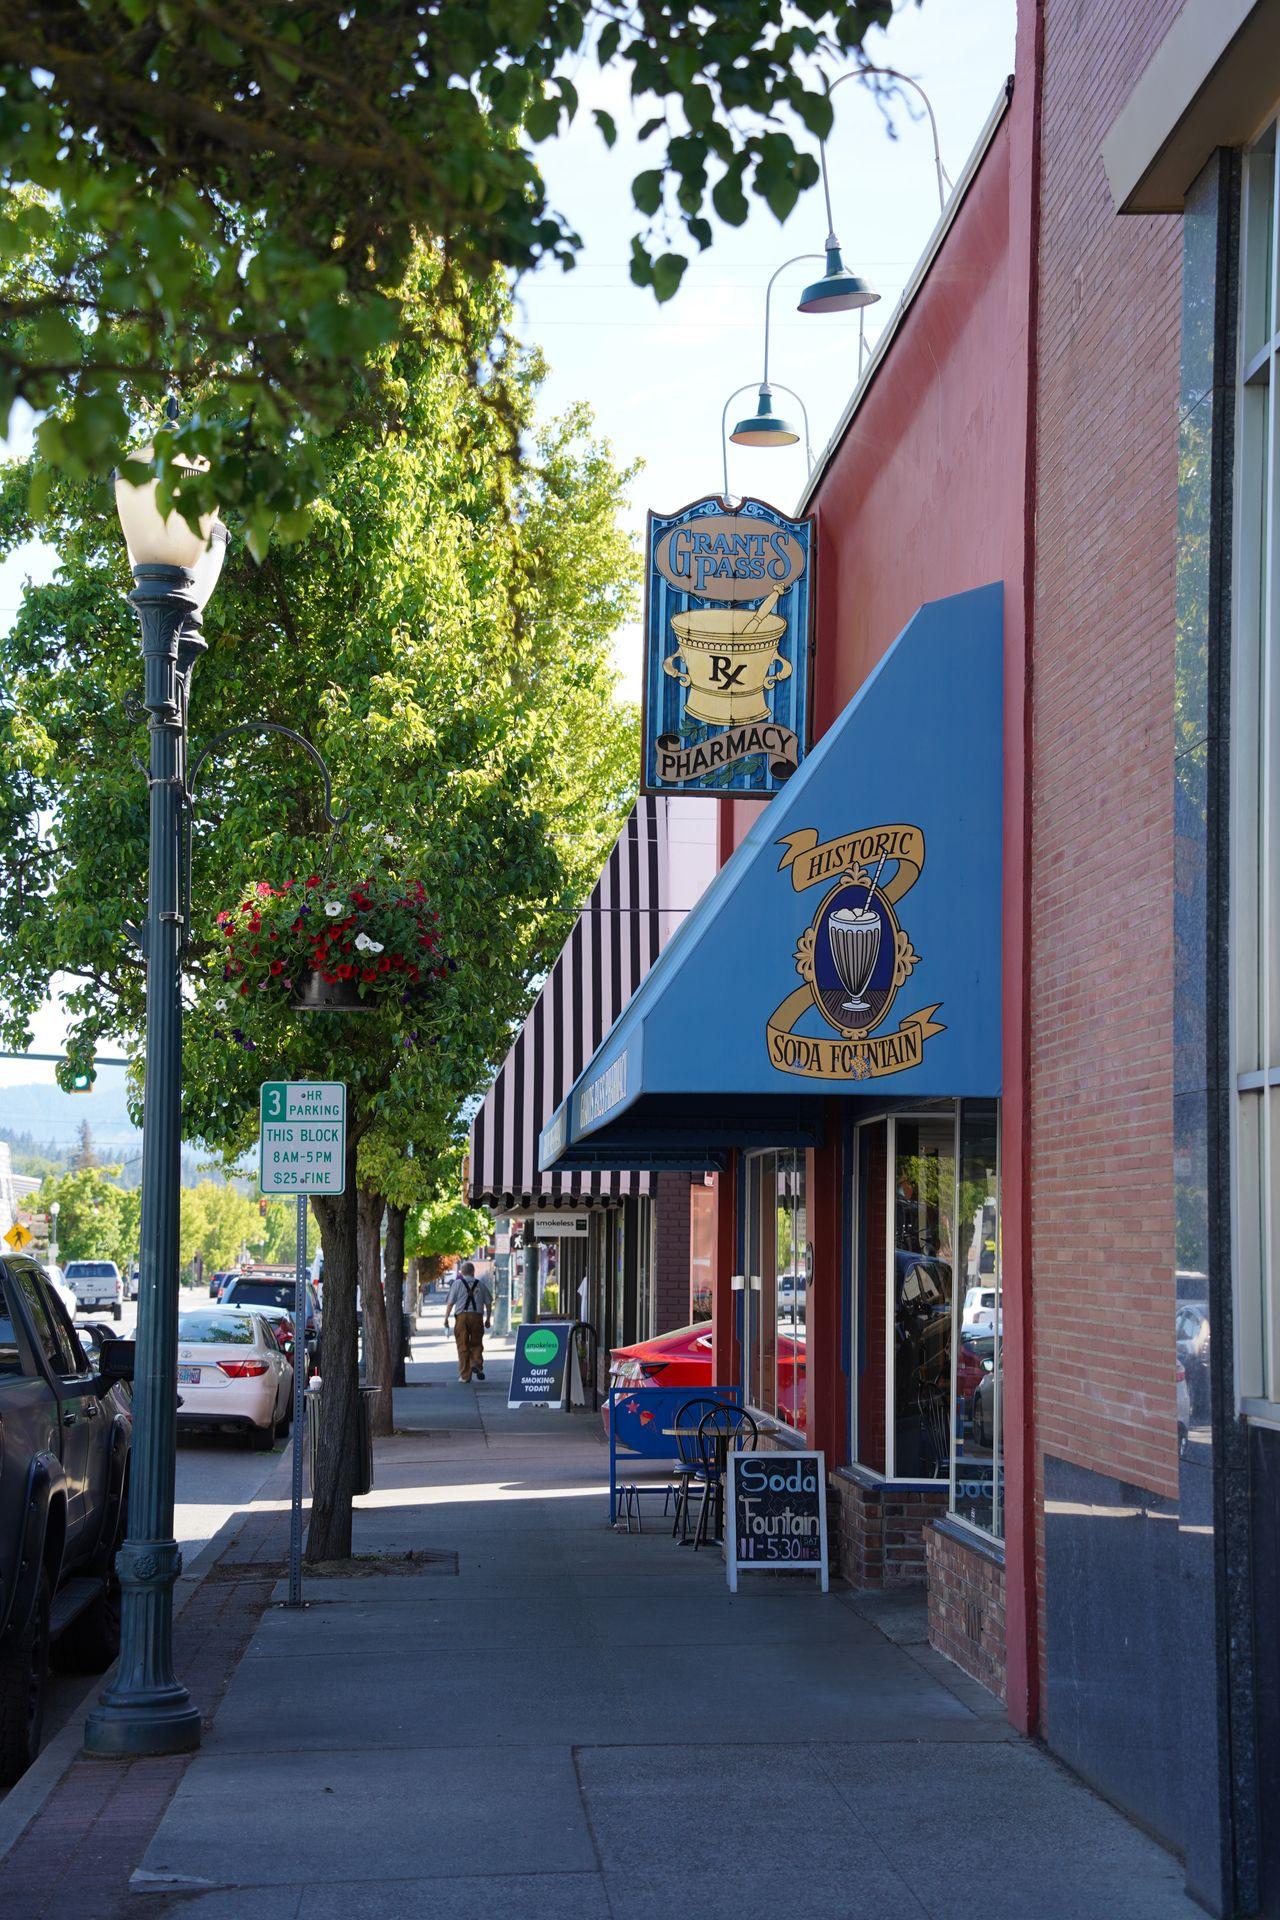 The exterior of Grants Pass Pharmacy. The awning reads 'Historic Soda Fountain'